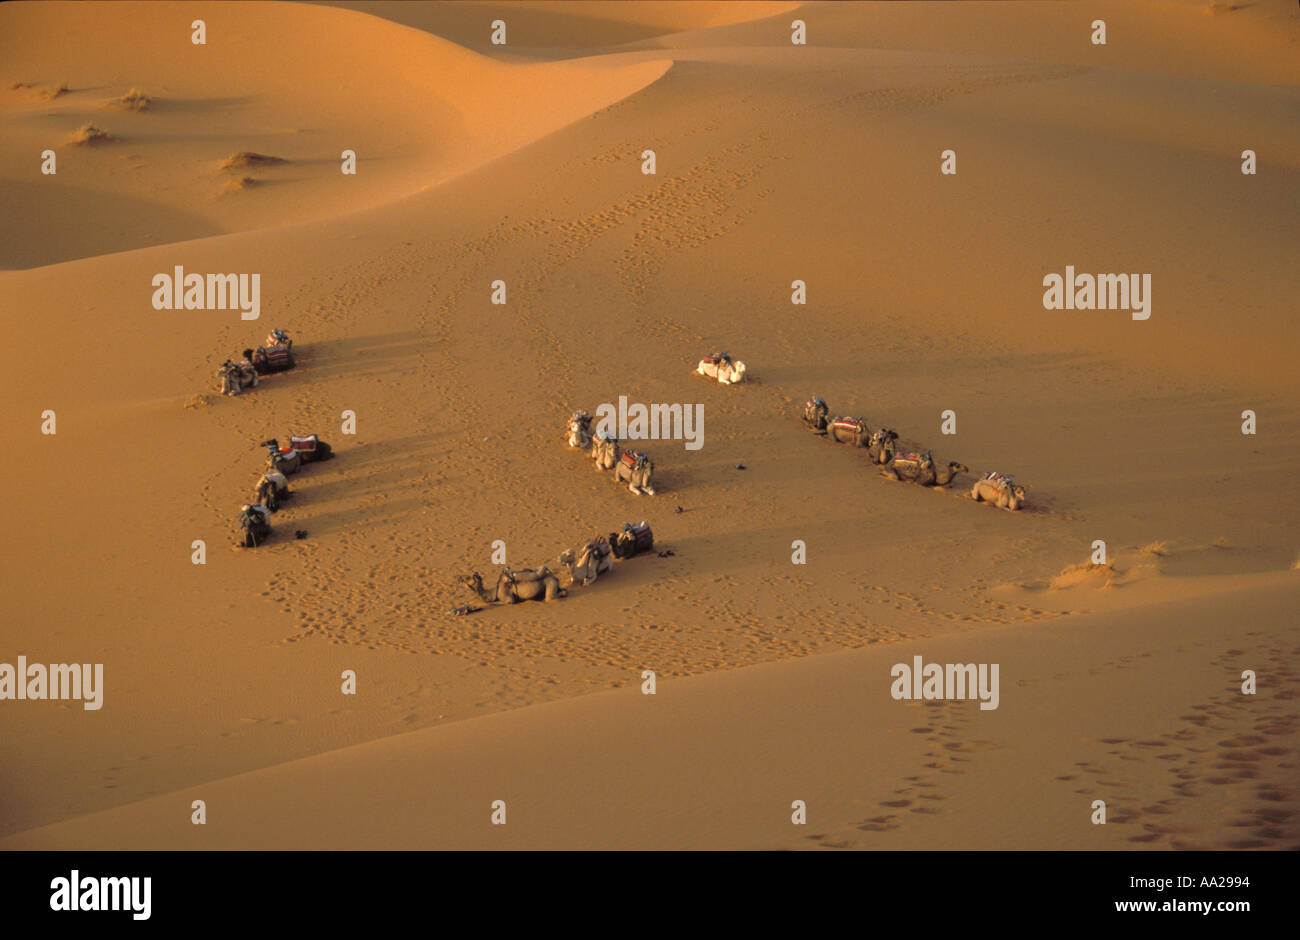 Camels in the Merzouga Sand Sea Morocco Stock Photo